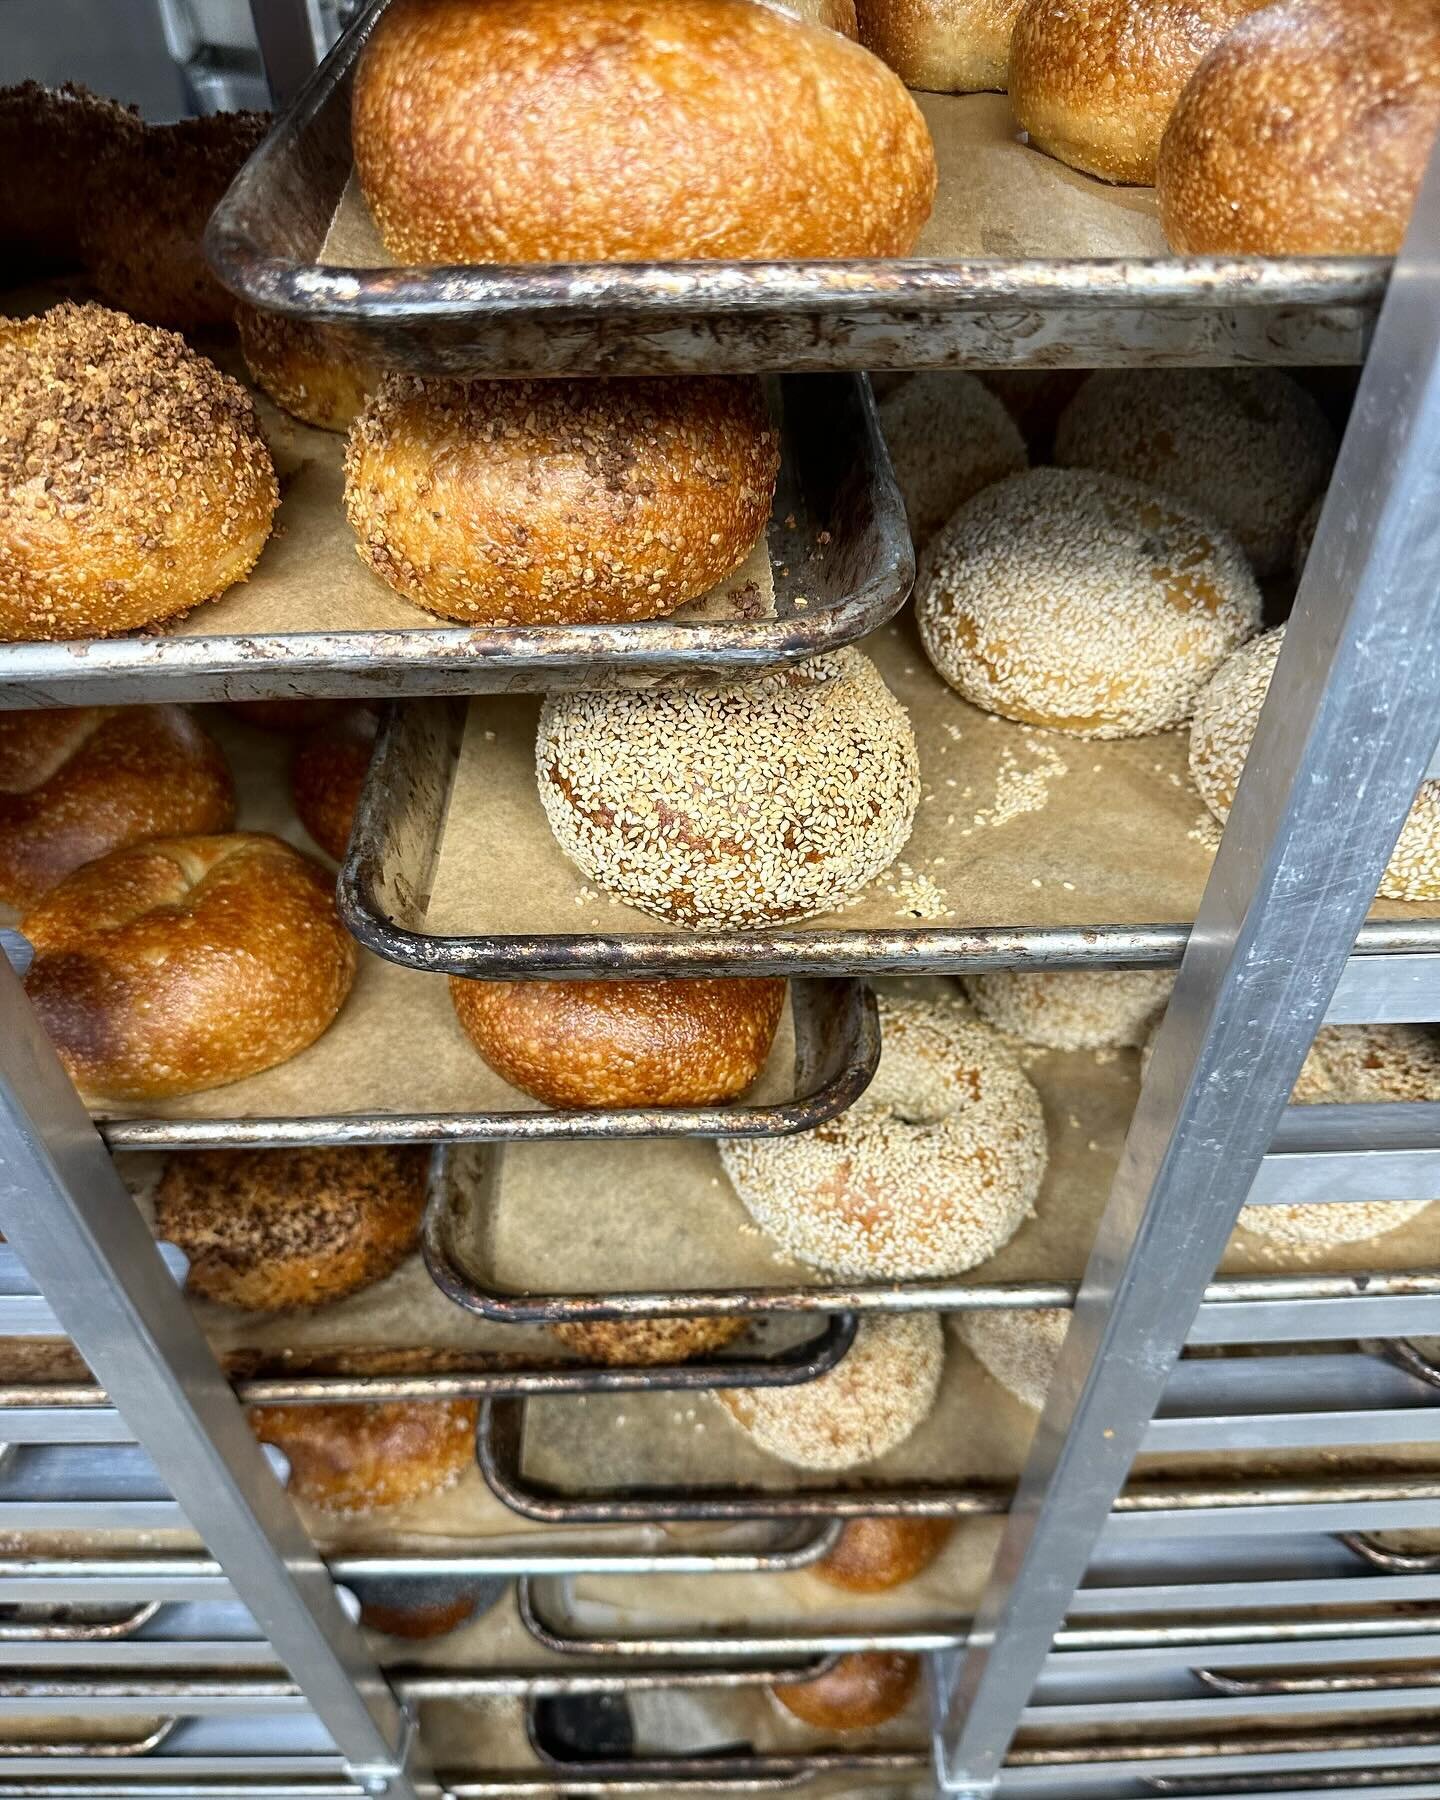 Sweet fancy Moses look at these babies.  100% professionally made by 100% professionals.  That&rsquo;s 200% pro stat bagels and that&rsquo;s science.
&hellip;
Open at 9:00